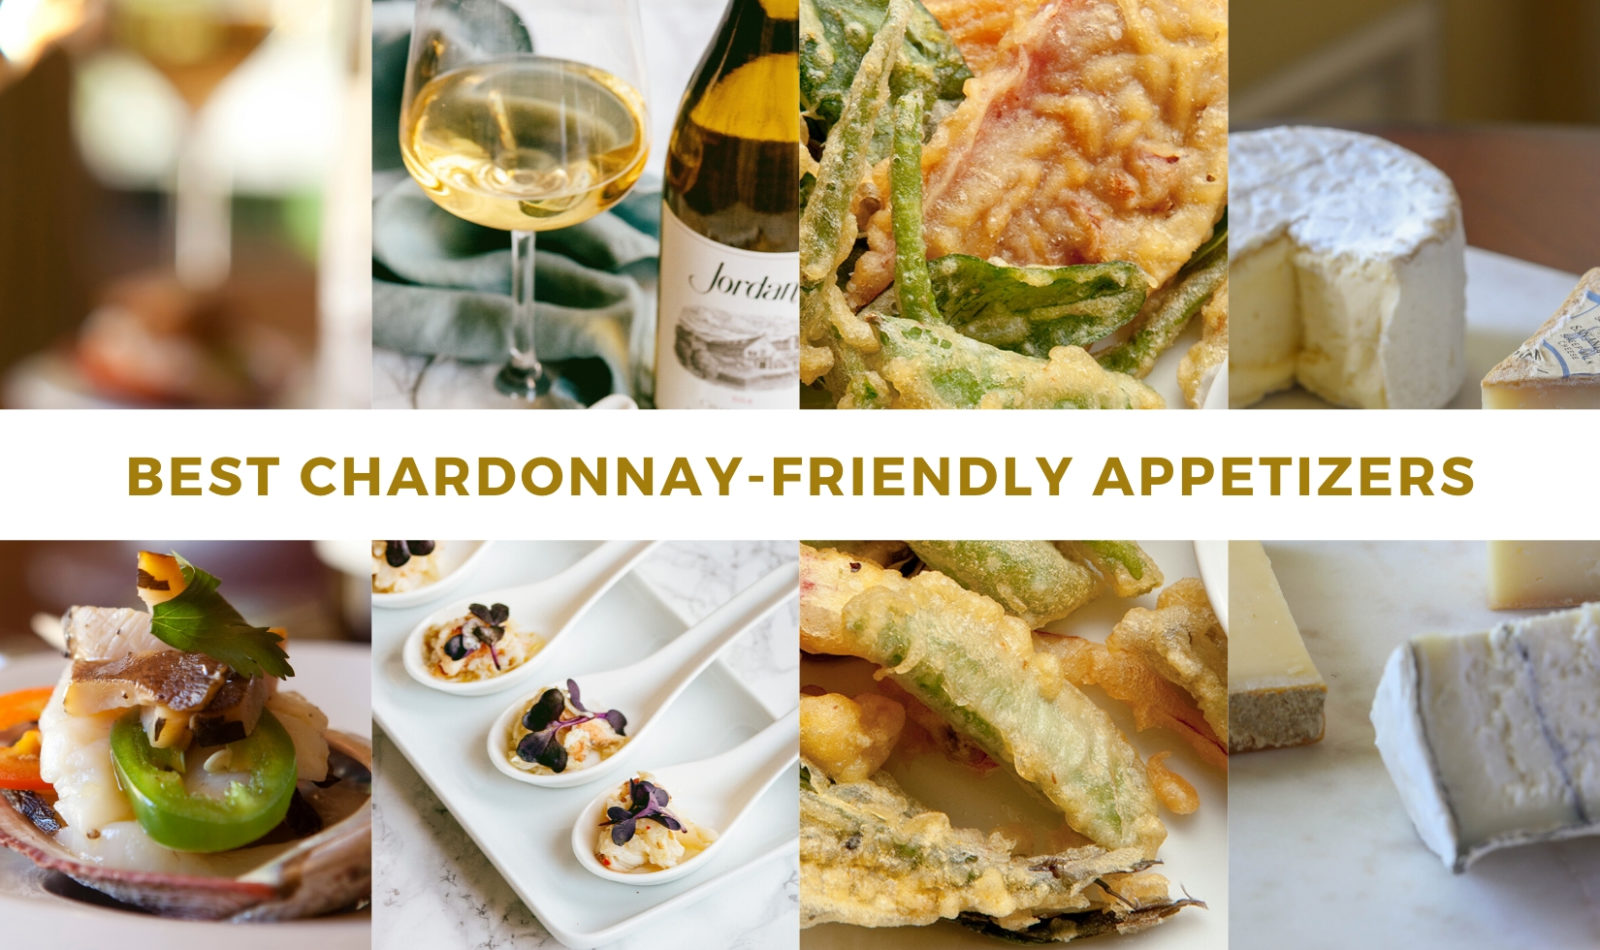 photo collage of Jordan Winery appetizers and cheese with Jordan Chardonnay bottle with image text "best Chardonnay-friendly appetizers"